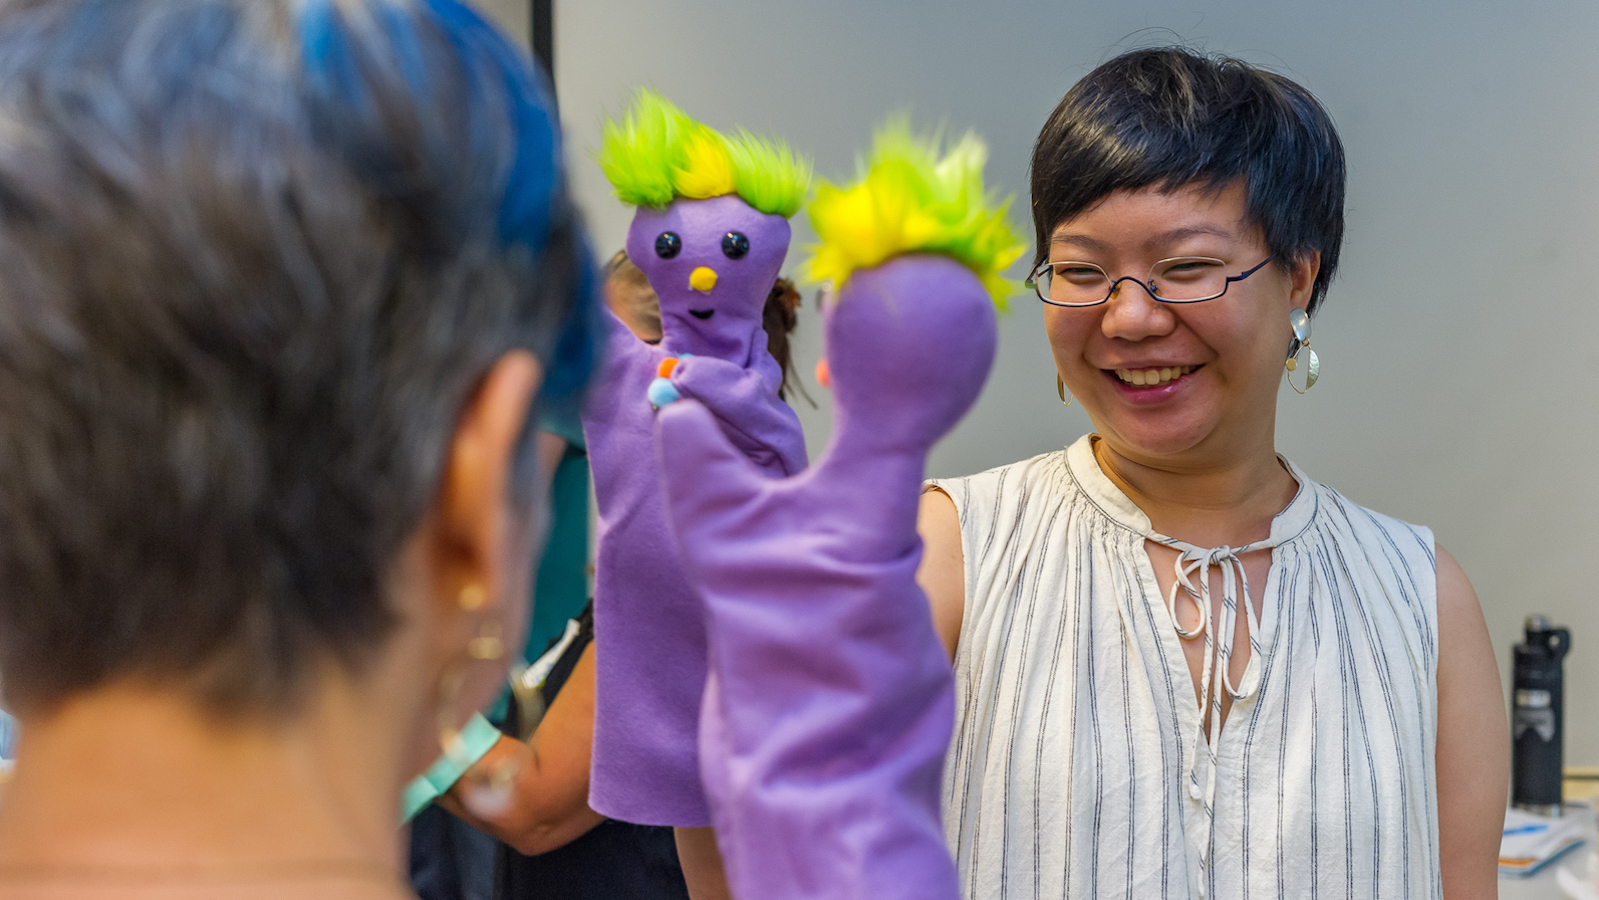 Two women smile and hold purple puppets up to each other